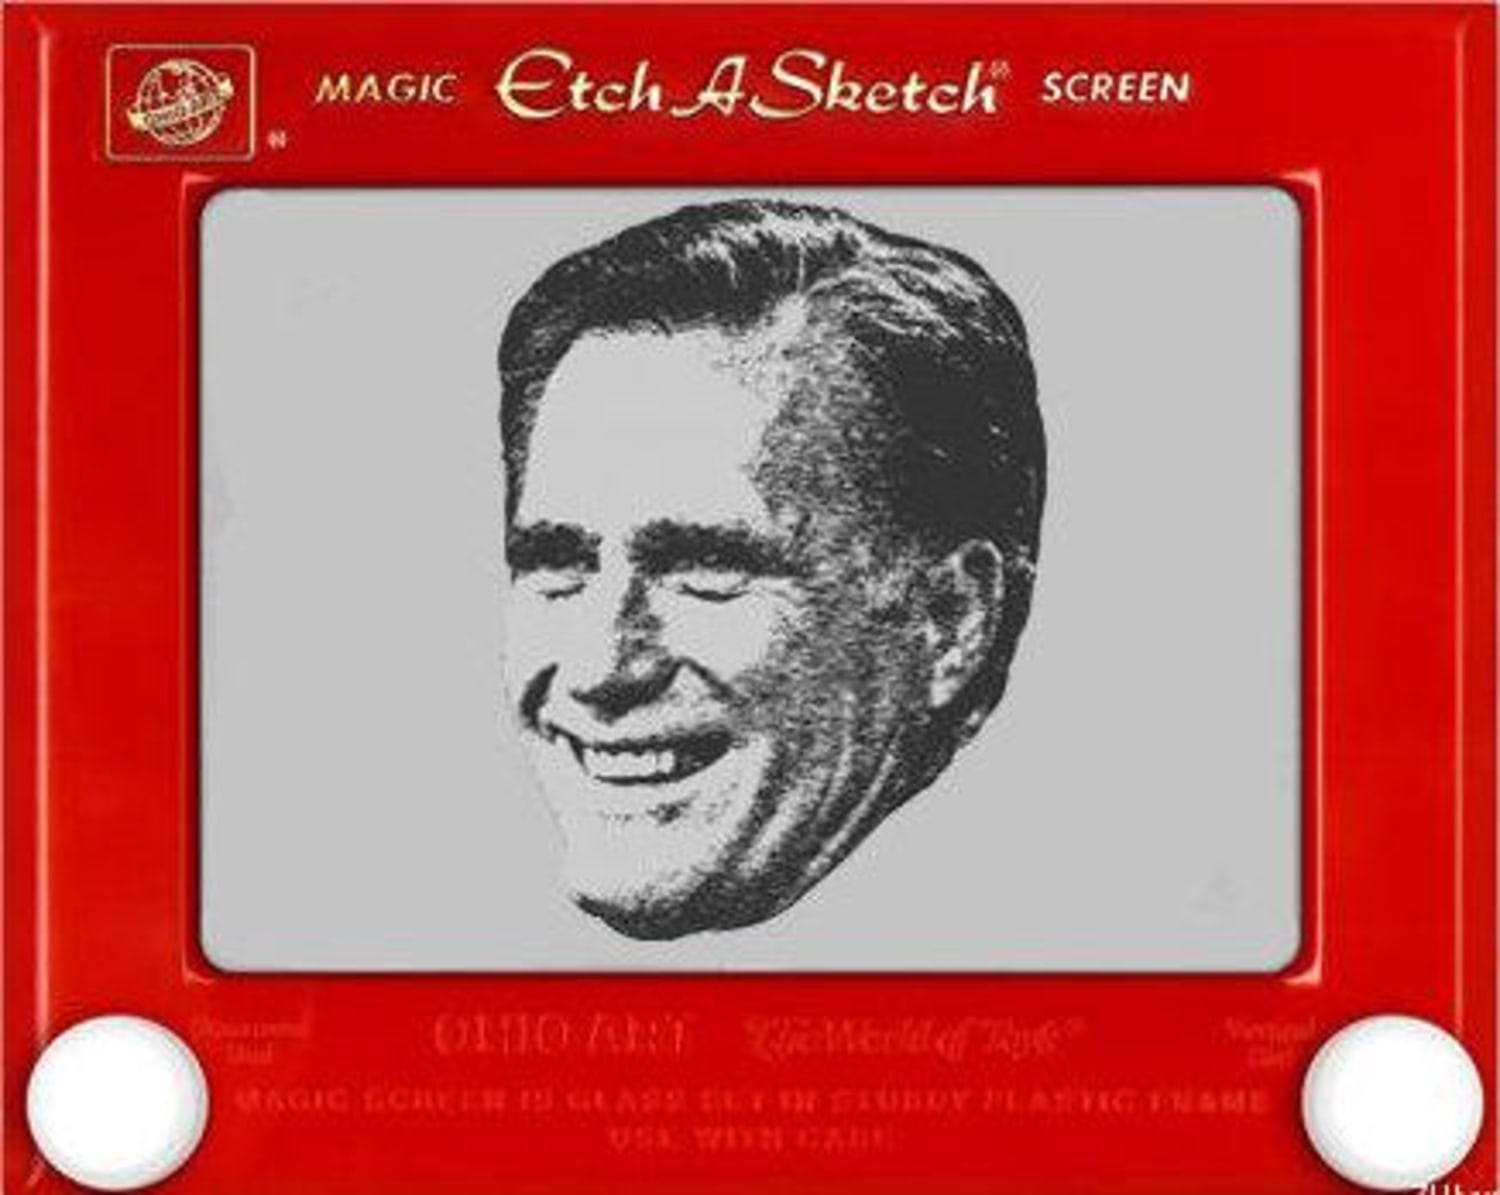 Why Etch A Sketch gibe will be hard for Romney to shake